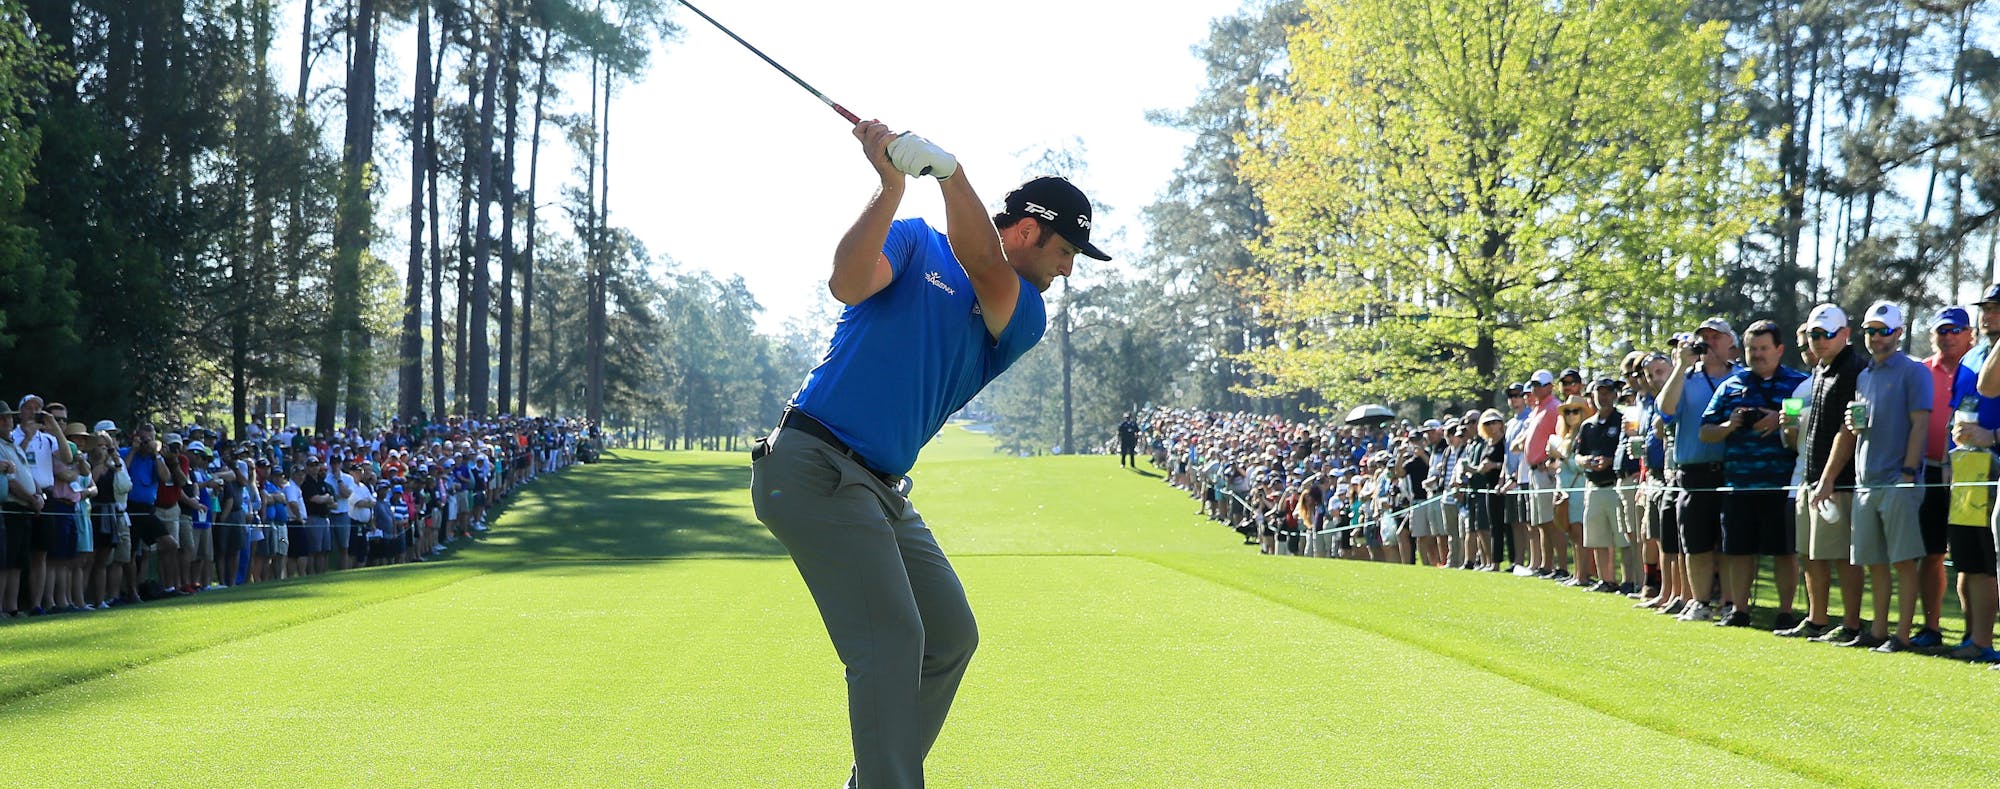 Masters Predictions 2023 - The Best Masters Picks to Make Before